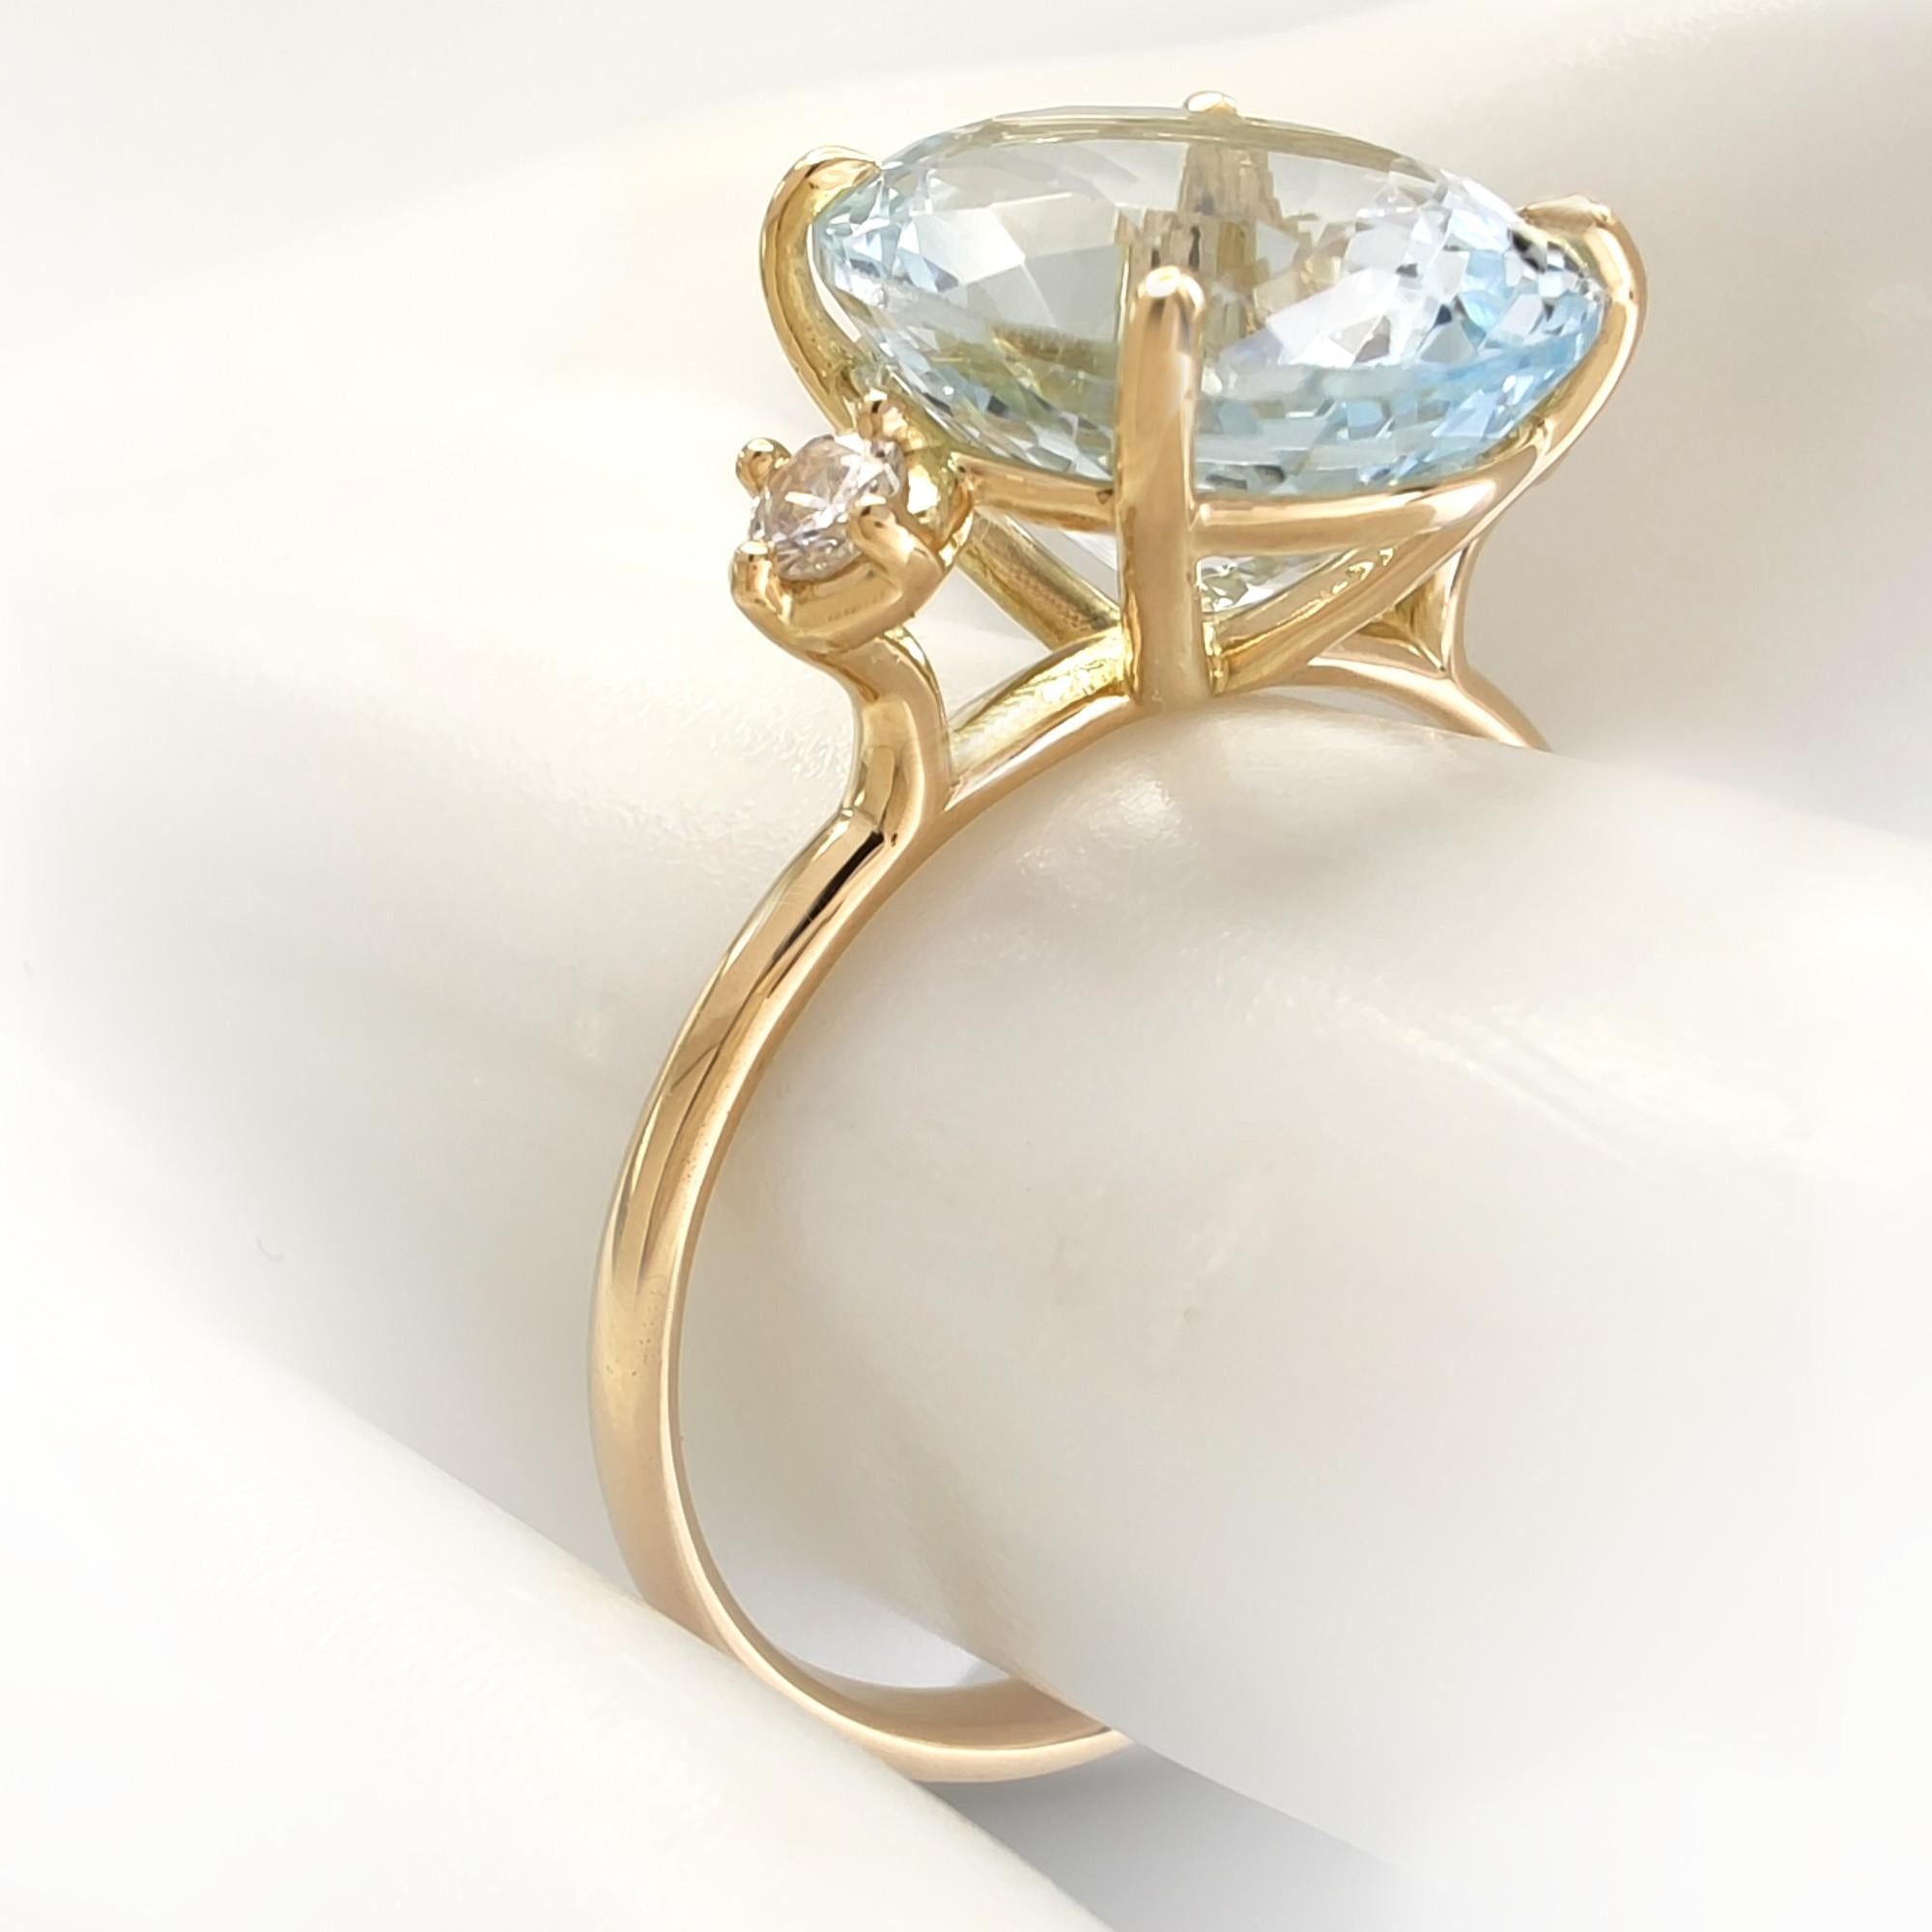 18K Gold Ring Aquamarine and Diamonds for weddings, engagements, proposals gifts 6